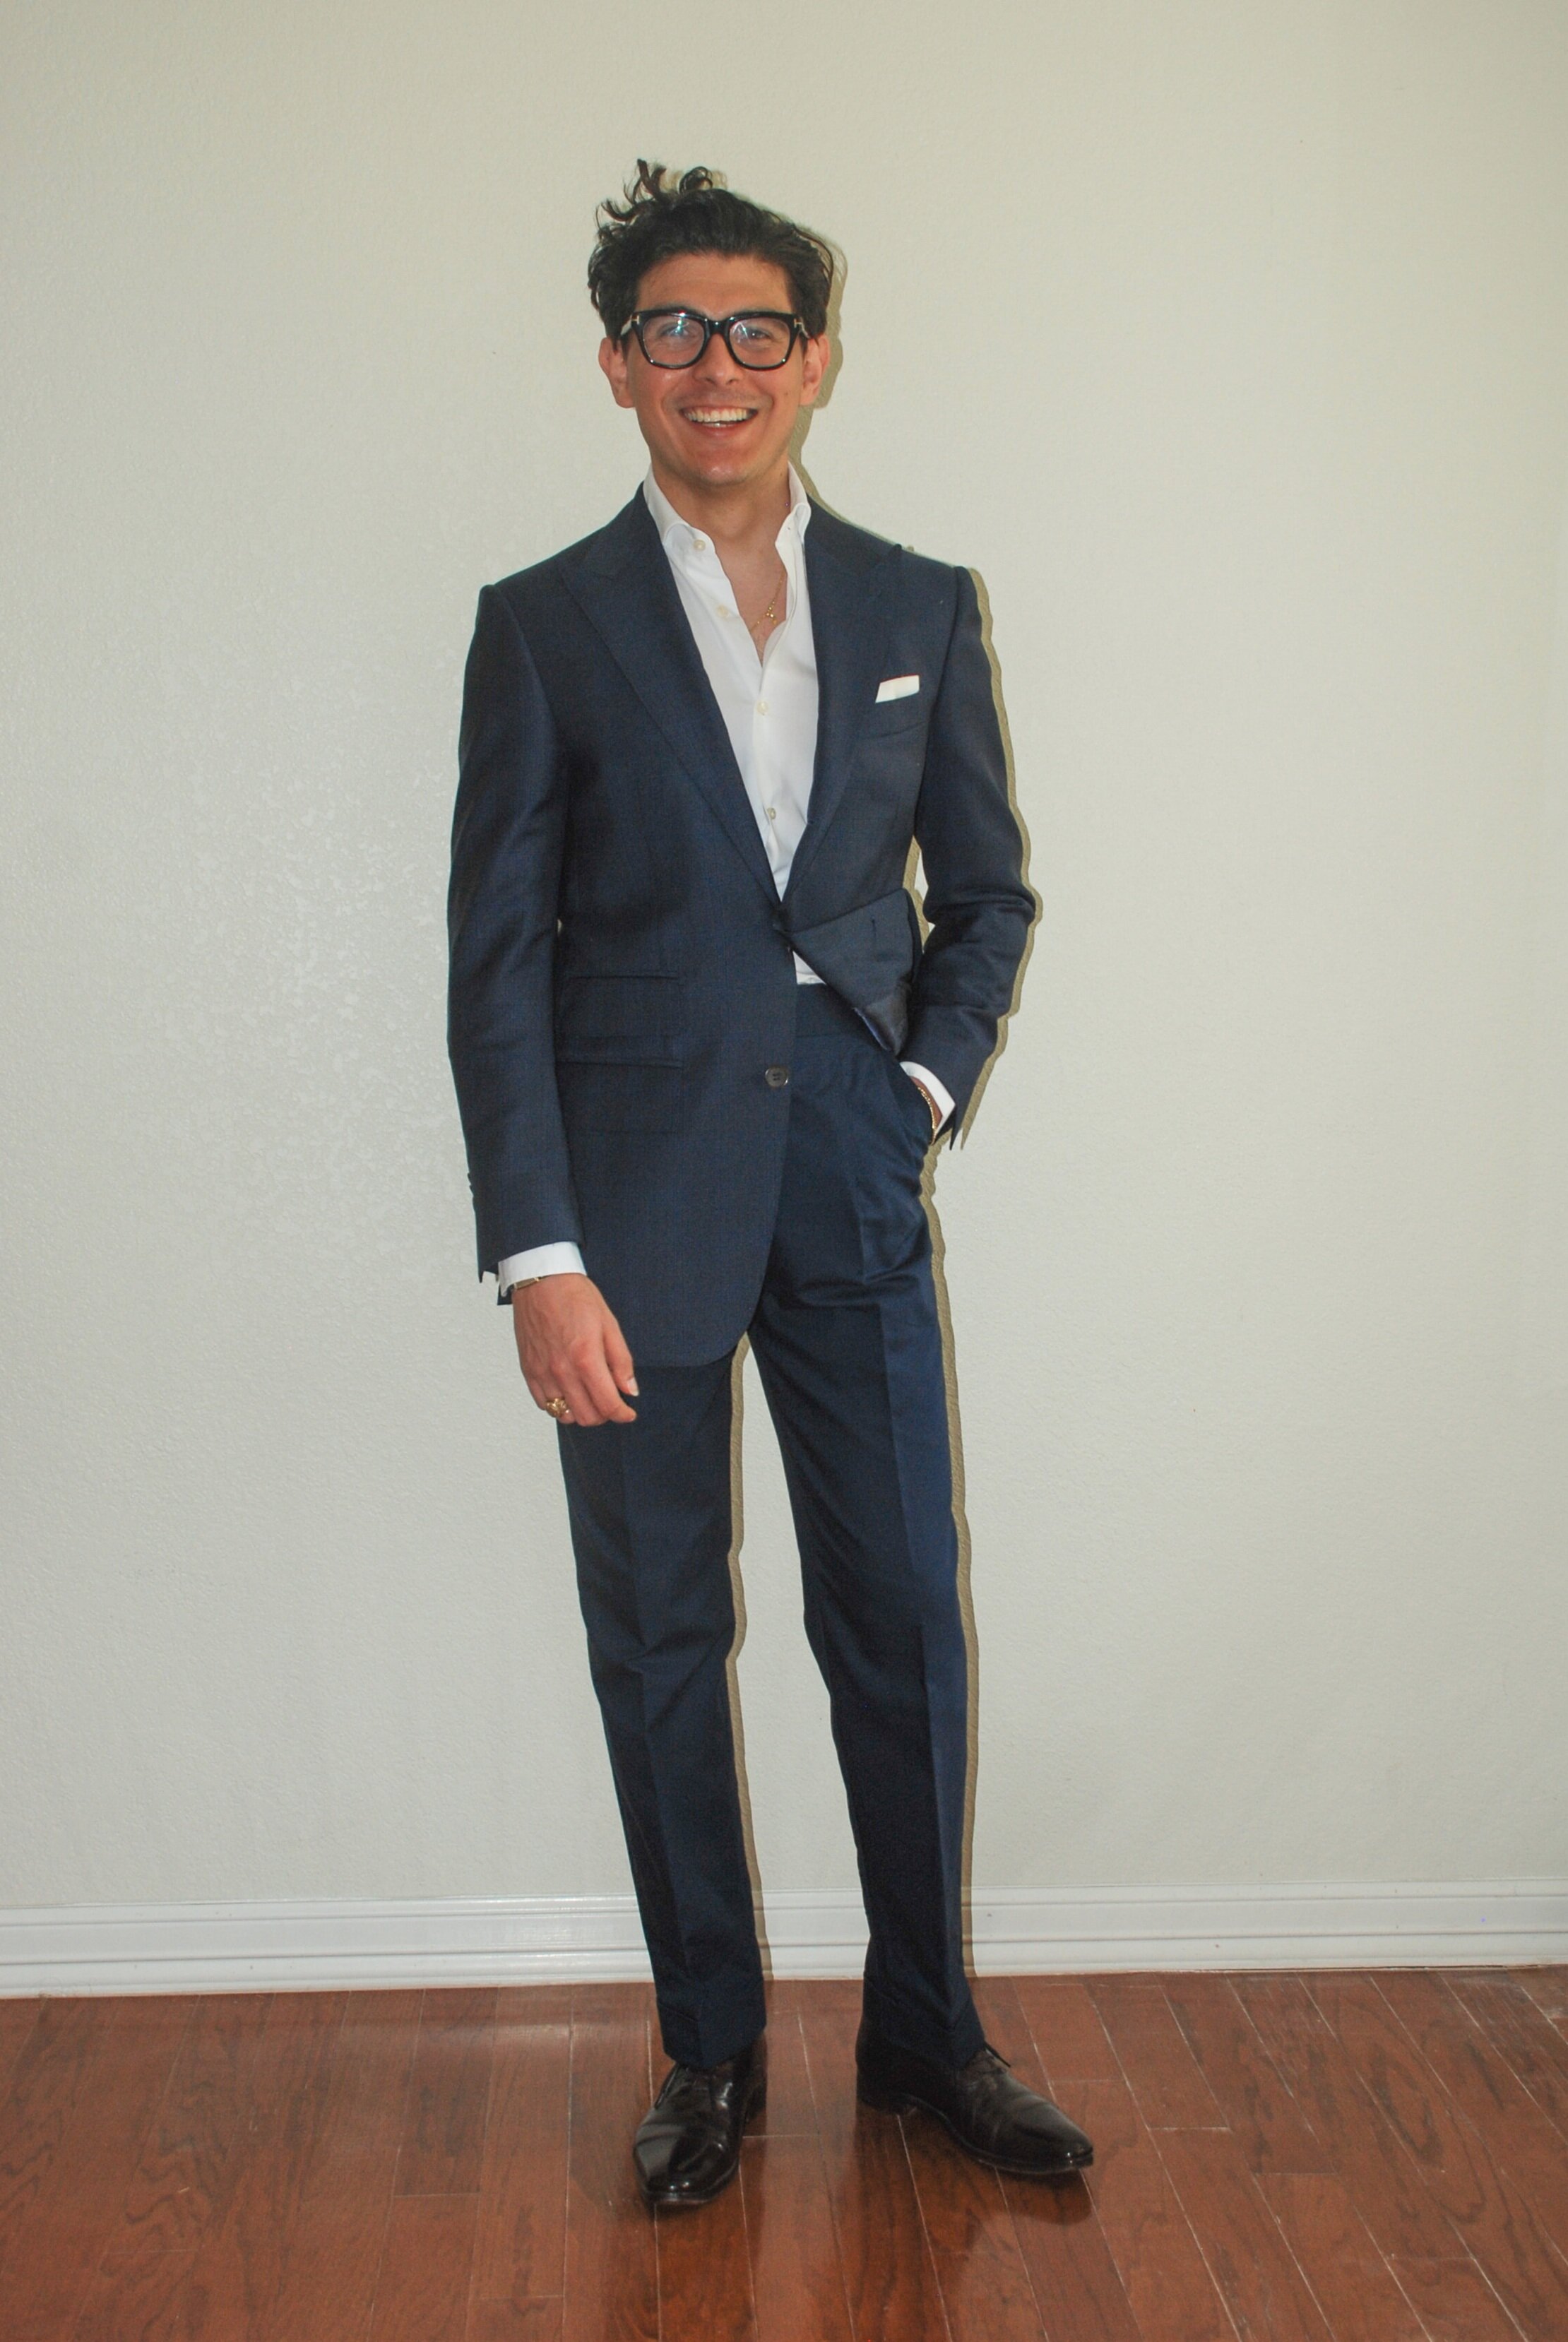 Made to Order Suits for Under 500 An Honest Review of Spier  Mackay